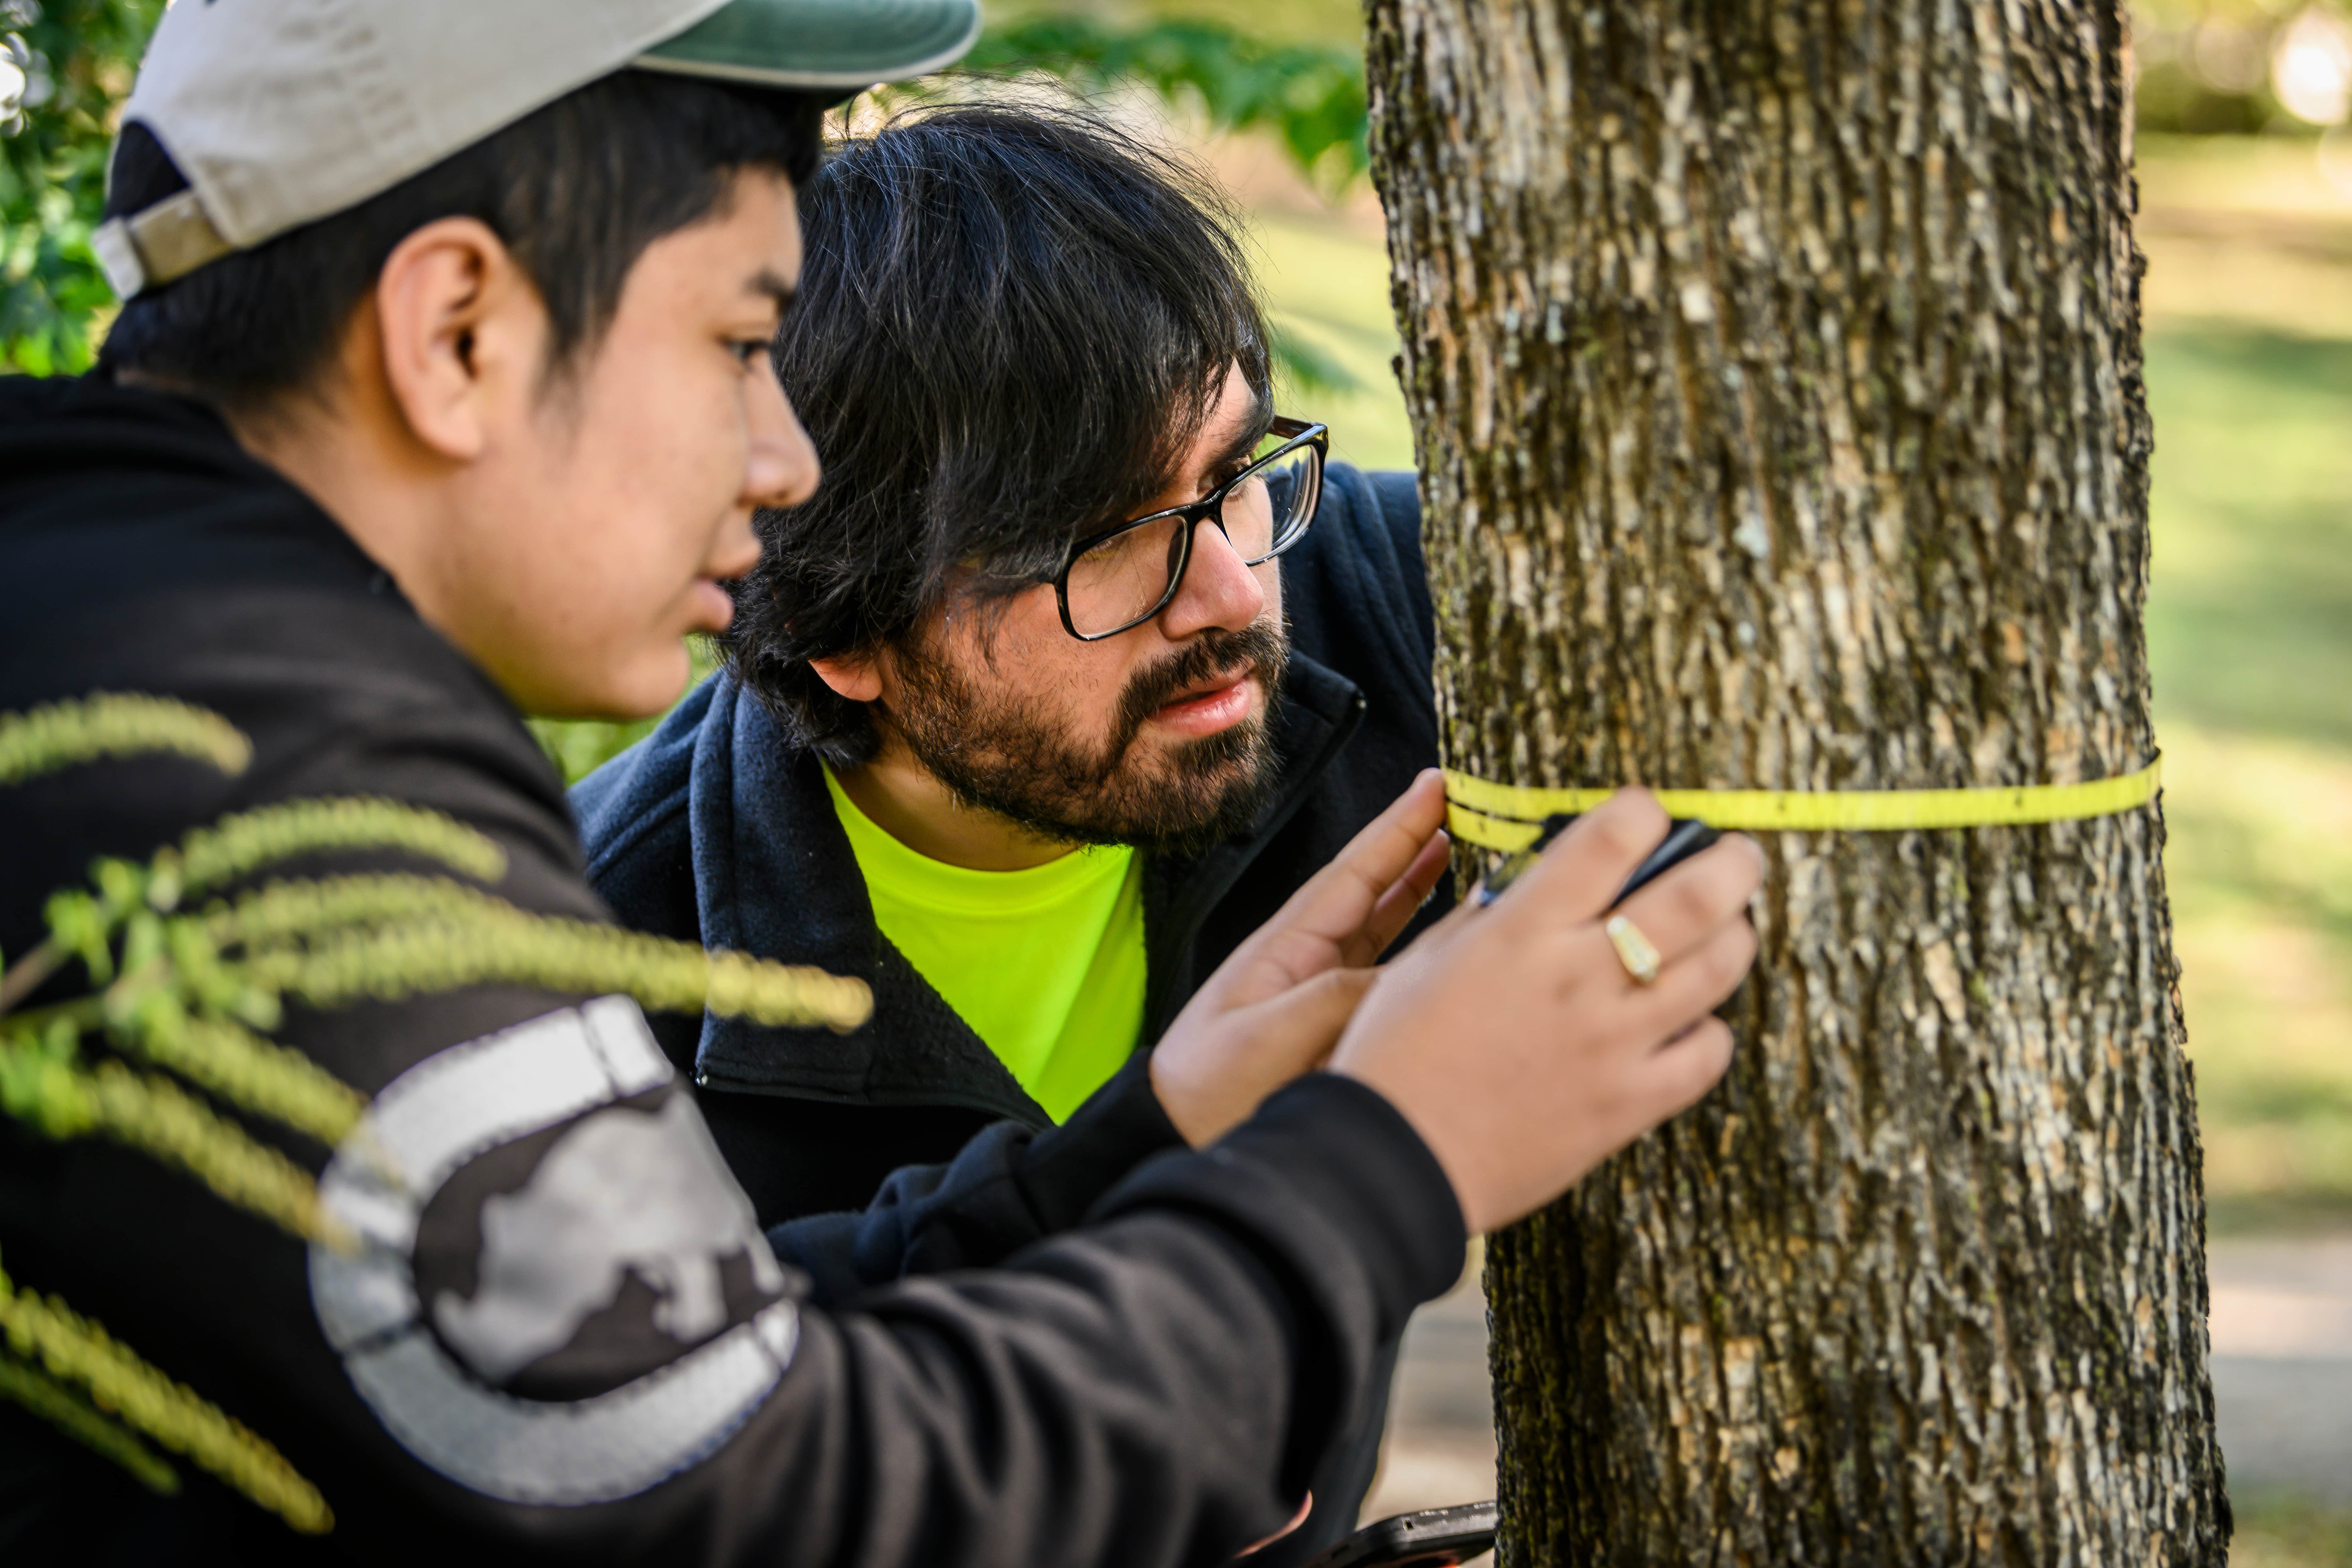 Two men observe a tape measure that wraps around a tree trunk.